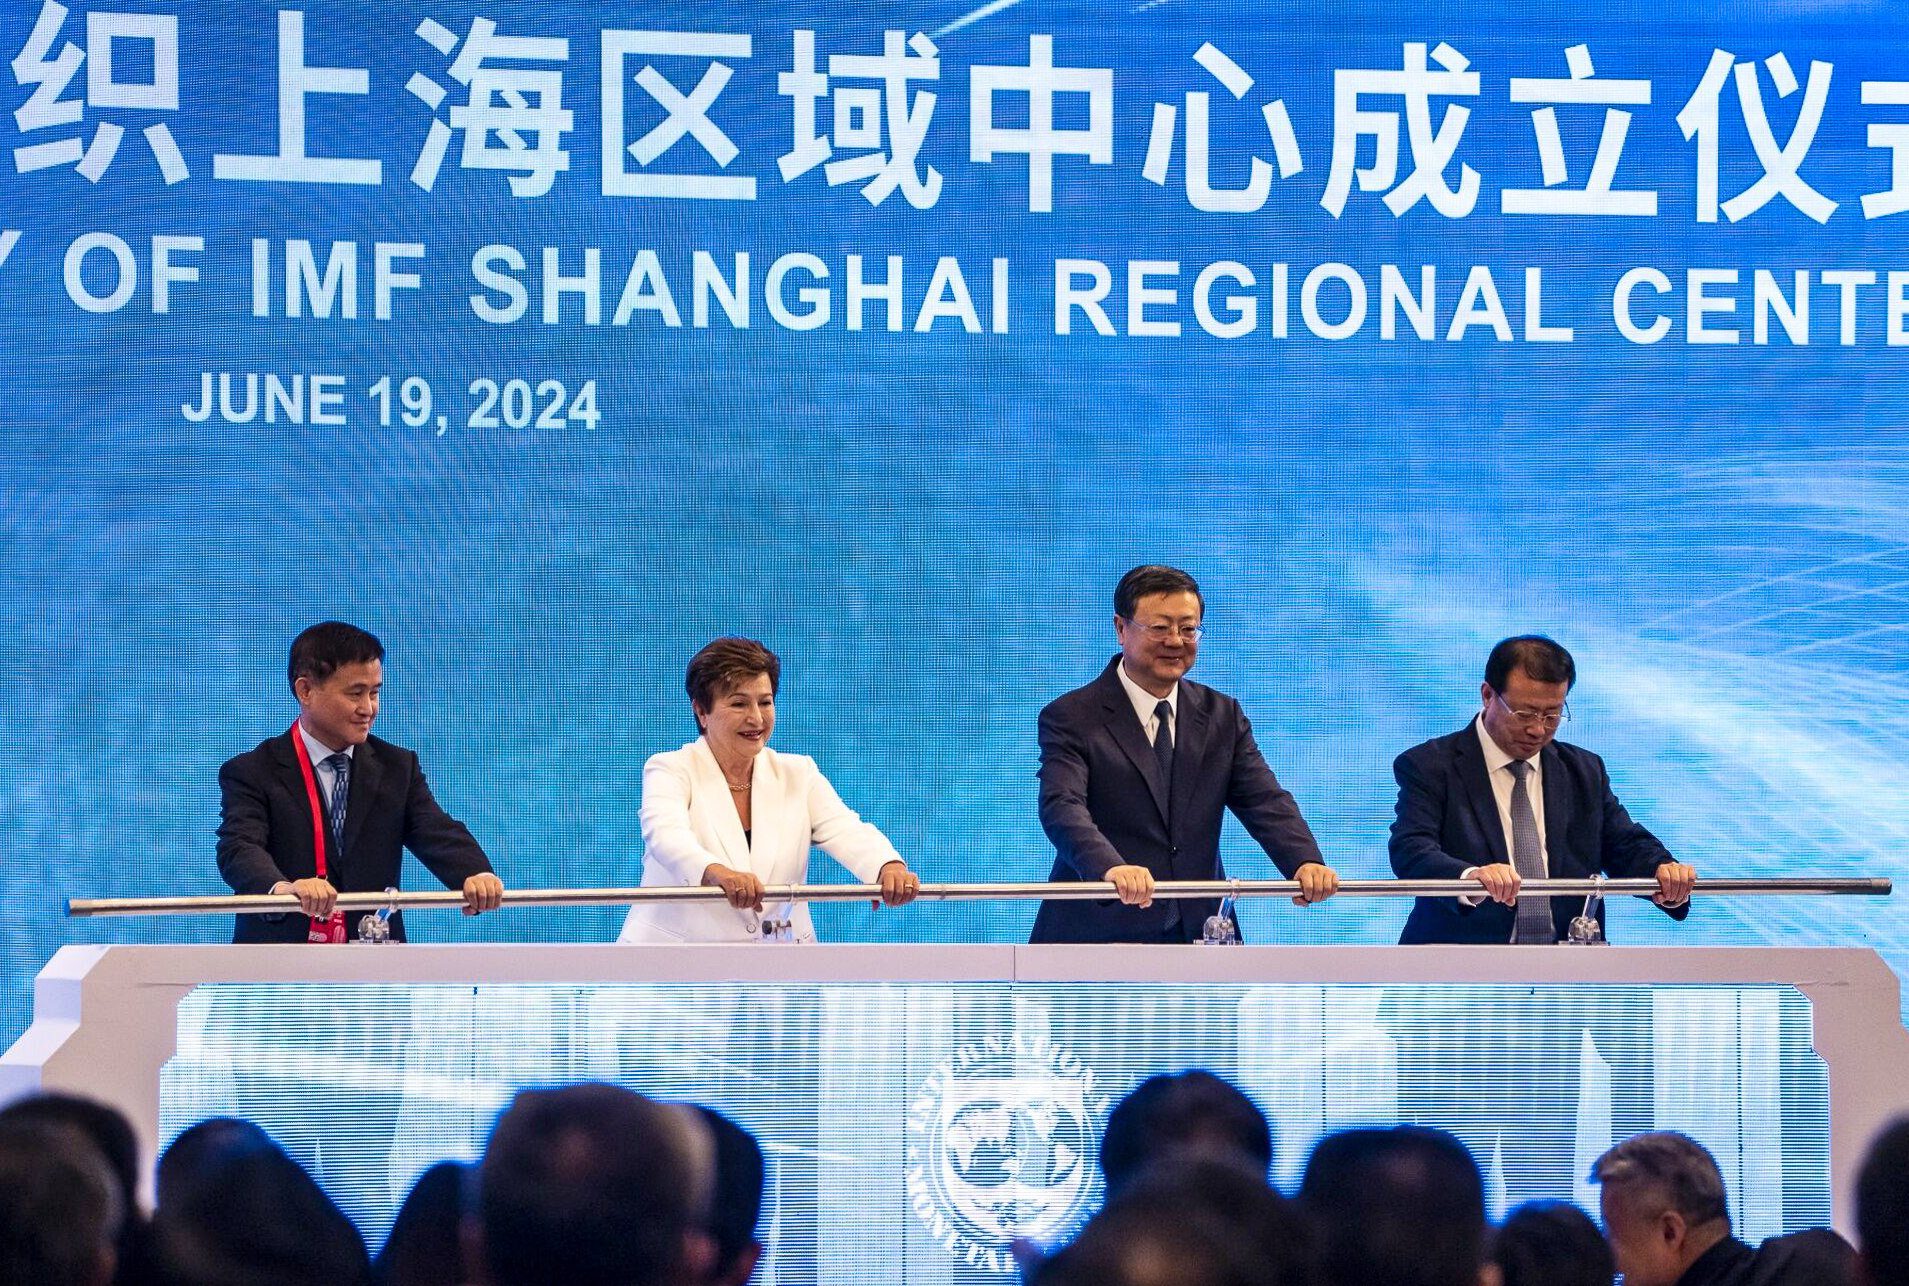 From left to right, PBOC governor Pan Gongsheng, IMF managing director Kristalina Georgieva, Shanghai party secretary Chen Jining, and Shanghai mayor Gong Zheng mark the opening an IMF regional centre in Shanghai on Wednesday during the Lujiazui Forum. Photo: Bloomberg